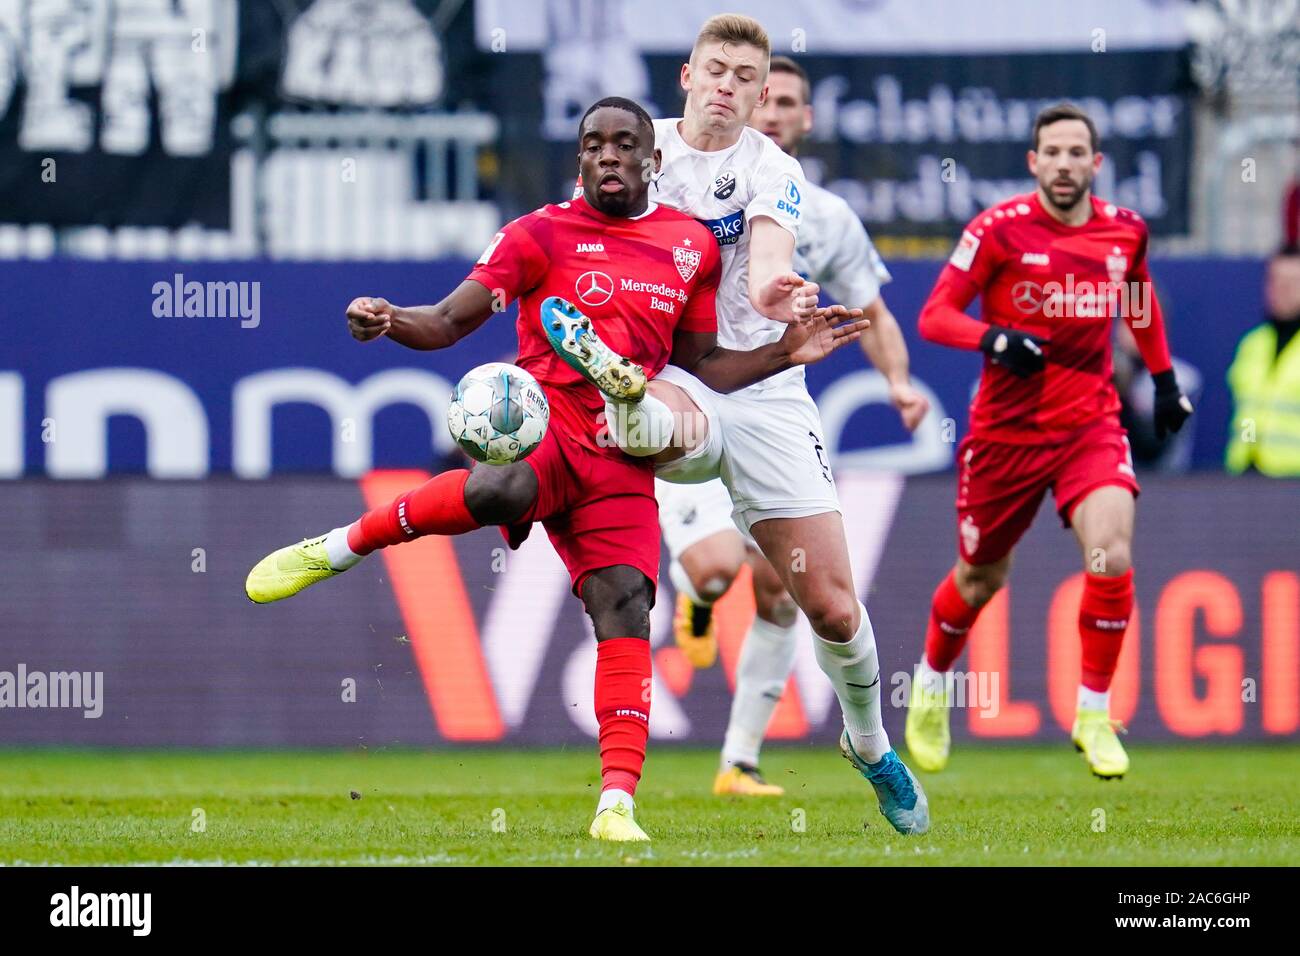 Sandhausen, Germany. 01st Dec, 2019. Soccer: 2nd Bundesliga, SV Sandhausen - VfB Stuttgart, 15th matchday, in Hardtwaldstadion. Stuttgart's Orel Mangala (l) and Sandhausens Aleksandr Zhirov fight for the ball. Credit: Uwe Anspach/dpa - IMPORTANT NOTE: In accordance with the requirements of the DFL Deutsche Fußball Liga or the DFB Deutscher Fußball-Bund, it is prohibited to use or have used photographs taken in the stadium and/or the match in the form of sequence images and/or video-like photo sequences./dpa/Alamy Live News Stock Photo